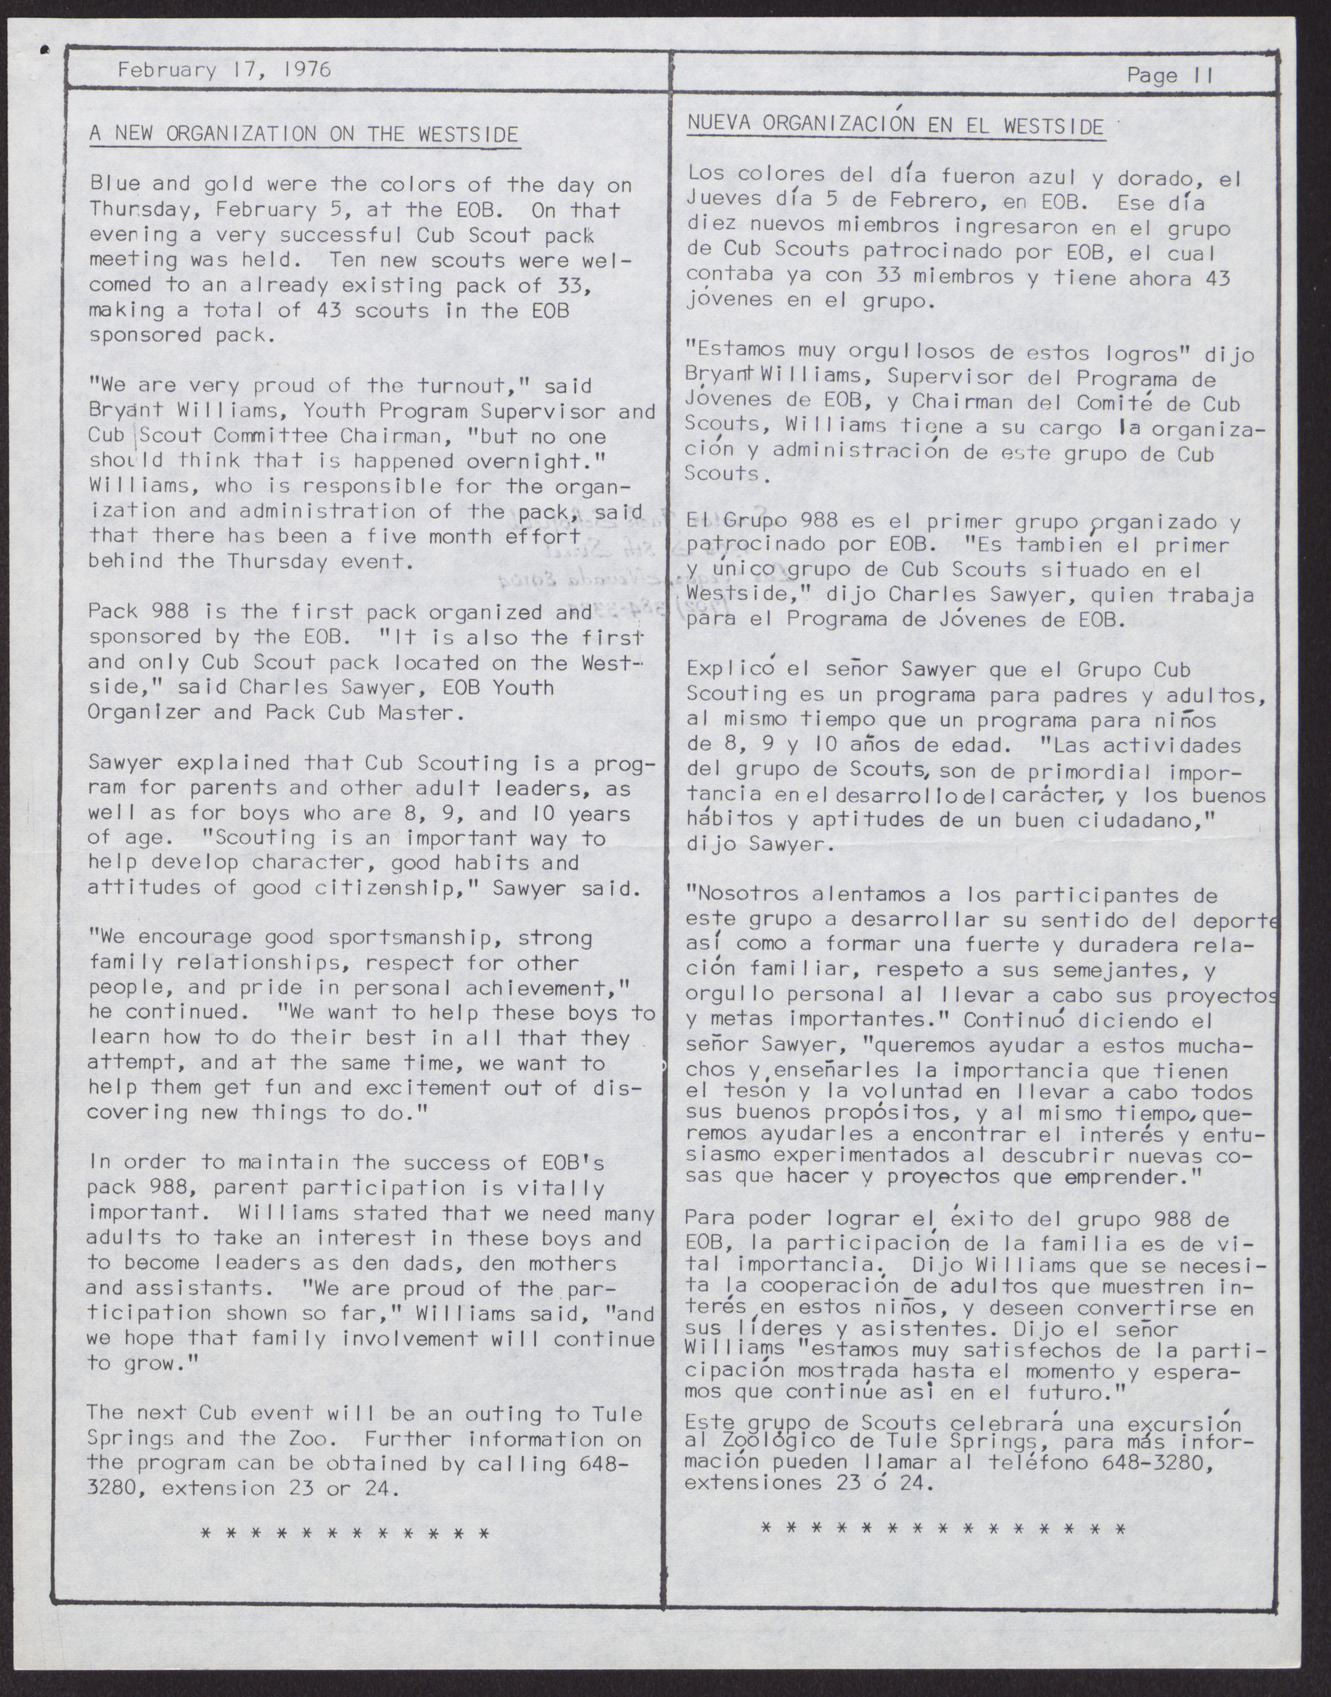 EOB Bulletin newsletter (12 pages), February 17, 1976, page 11